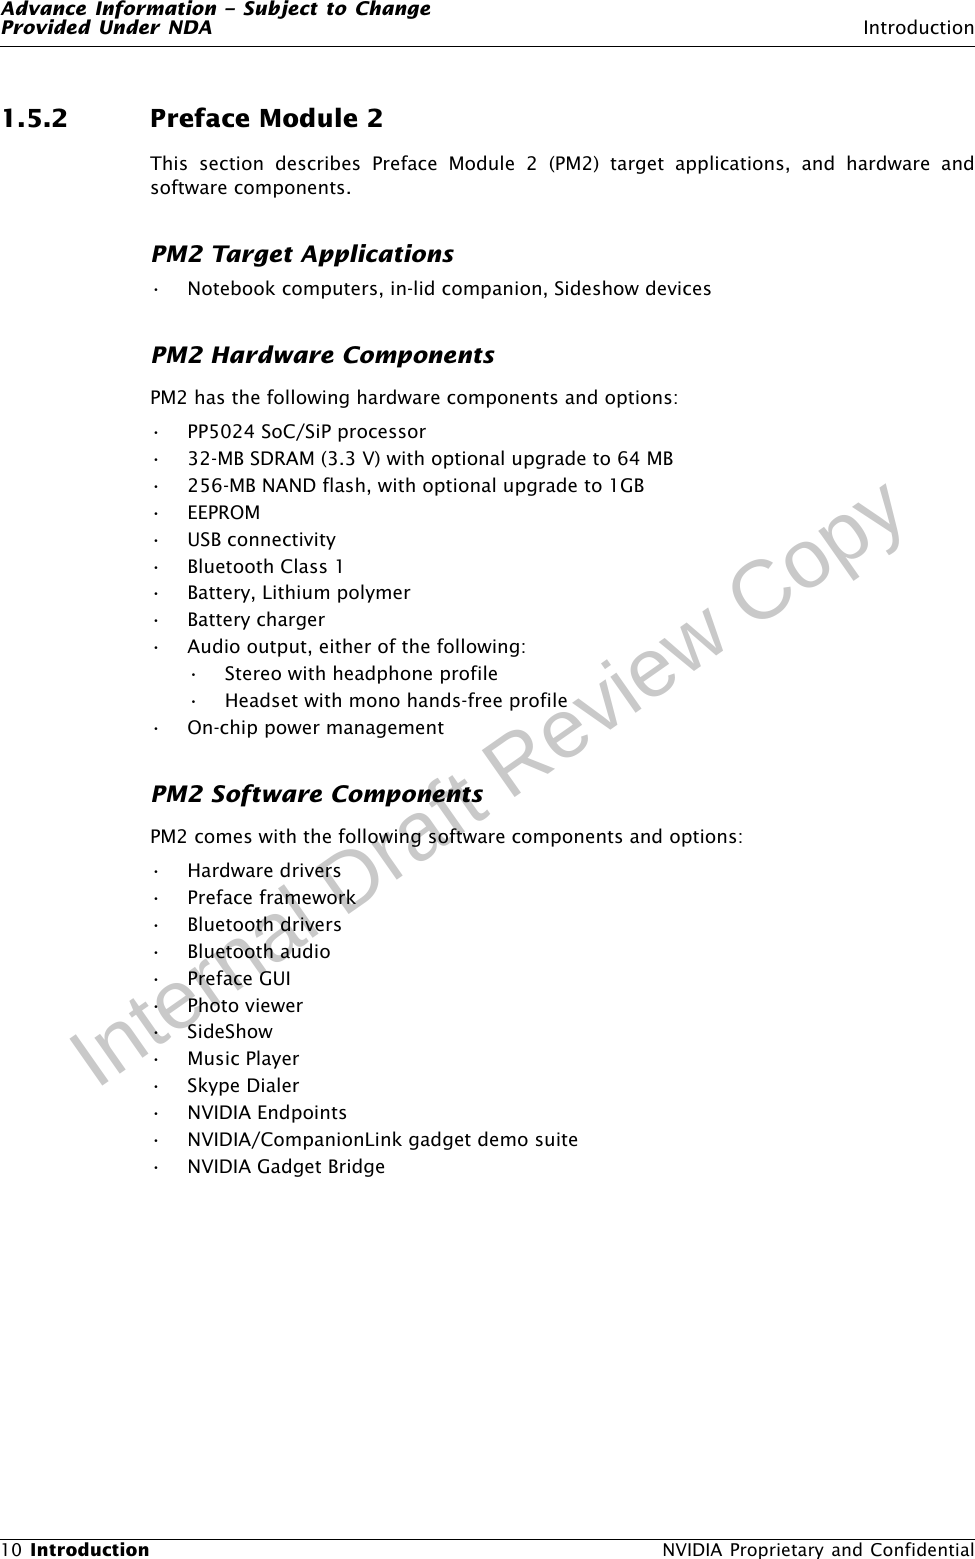 Advance Information – Subject to ChangeProvided Under NDA Introduction10 Introduction  NVIDIA Proprietary and ConfidentialInternal Draft Review Copy1.5.2 Preface Module 2This section describes Preface Module 2 (PM2) target applications, and hardware andsoftware components.PM2 Target Applications• Notebook computers, in-lid companion, Sideshow devicesPM2 Hardware ComponentsPM2 has the following hardware components and options:• PP5024 SoC/SiP processor• 32-MB SDRAM (3.3 V) with optional upgrade to 64 MB• 256-MB NAND flash, with optional upgrade to 1GB • EEPROM• USB connectivity• Bluetooth Class 1• Battery, Lithium polymer• Battery charger• Audio output, either of the following:• Stereo with headphone profile• Headset with mono hands-free profile• On-chip power managementPM2 Software ComponentsPM2 comes with the following software components and options:• Hardware drivers• Preface framework• Bluetooth drivers• Bluetooth audio•Preface GUI• Photo viewer•SideShow•Music Player•Skype Dialer• NVIDIA Endpoints• NVIDIA/CompanionLink gadget demo suite• NVIDIA Gadget Bridge